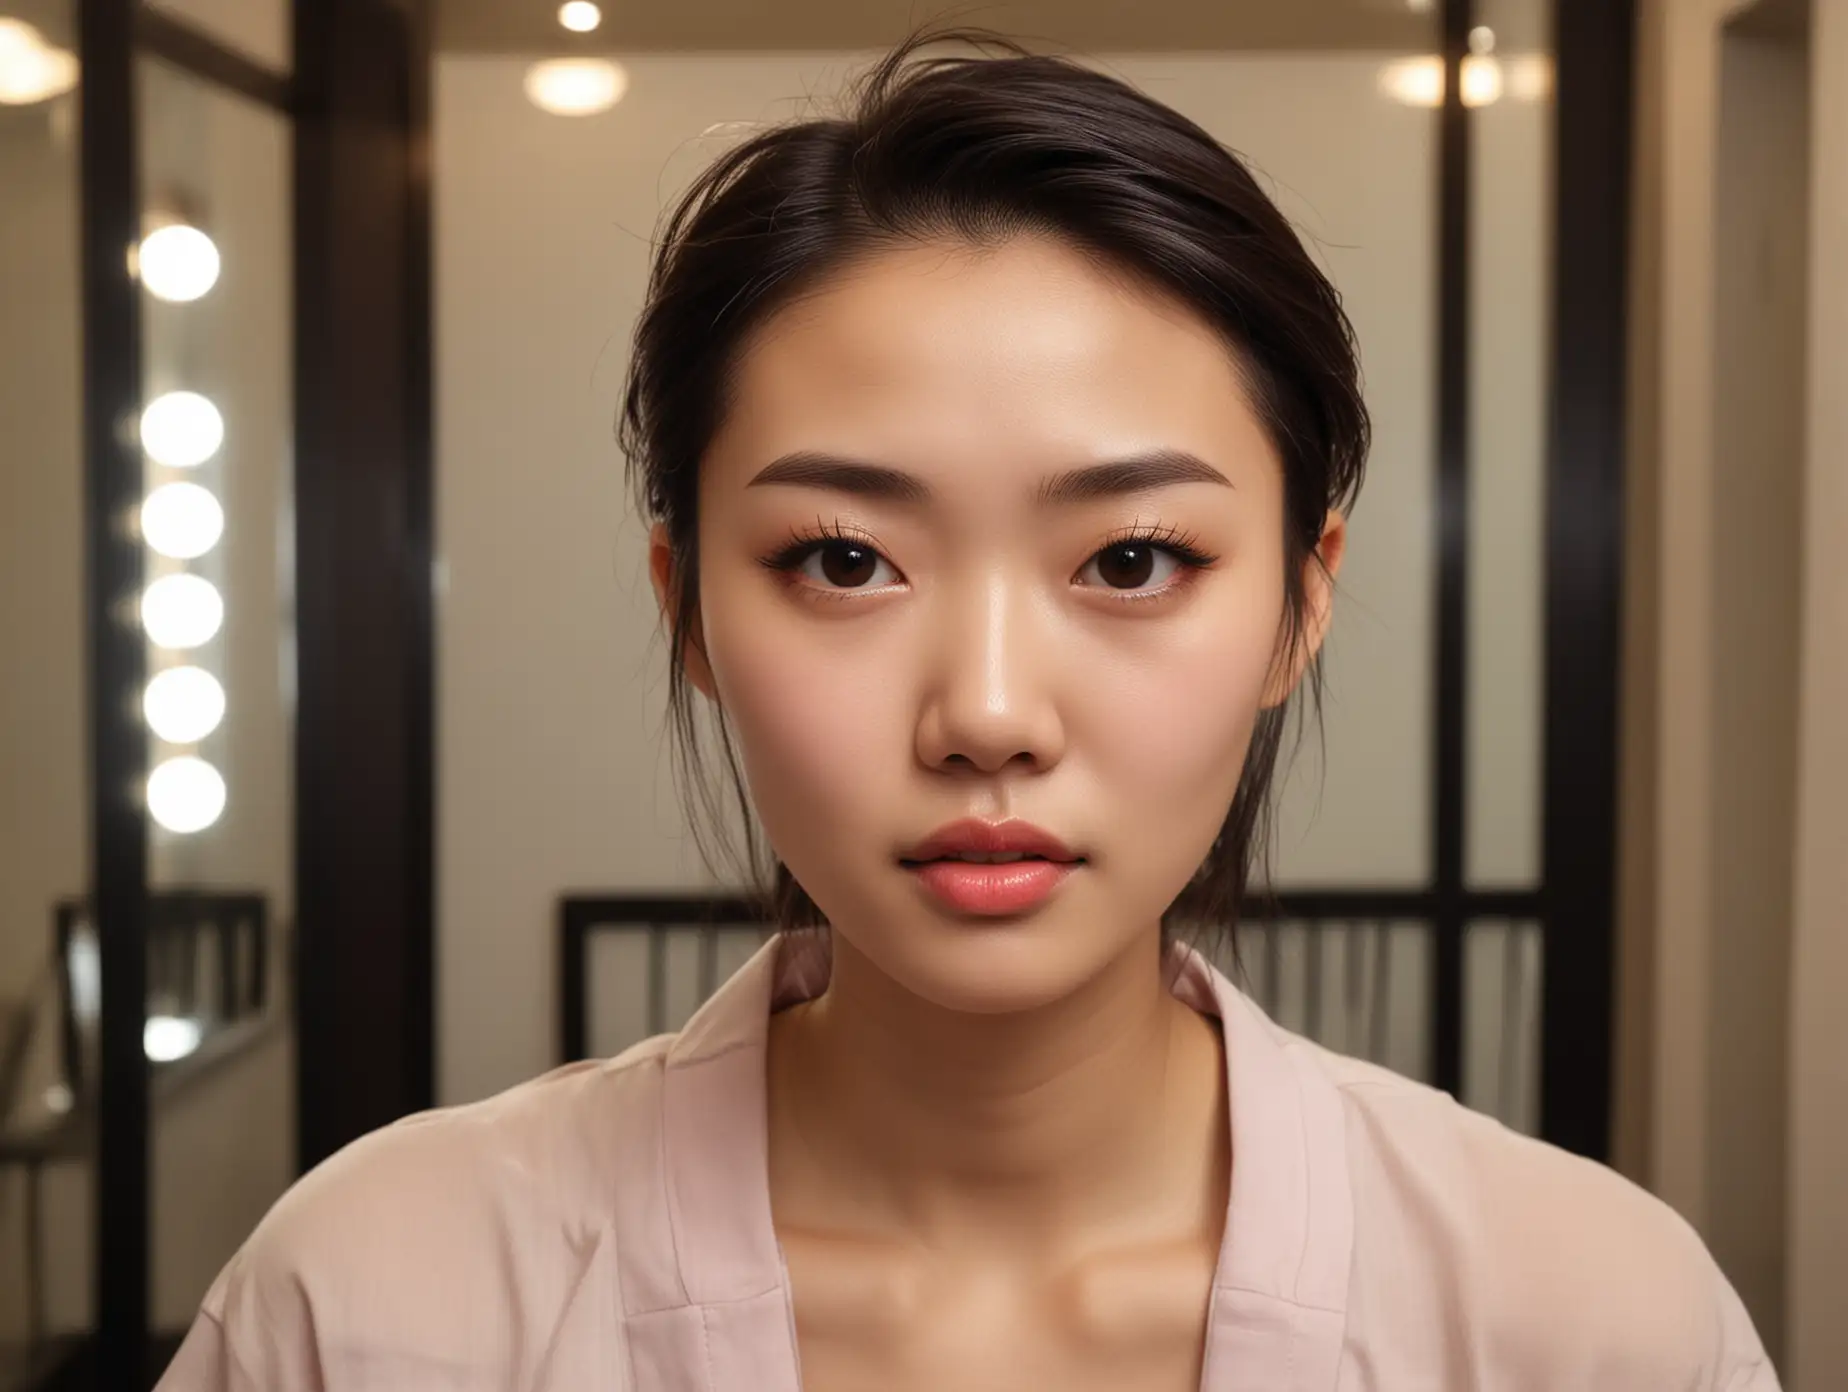 face of a stunned shy angelic skinny chinese hair stylist in an upscale salon. she is blushing and breathless, her lips parted, staring at the camera with a desperate pleading look. she is a natural beauty without makeup.